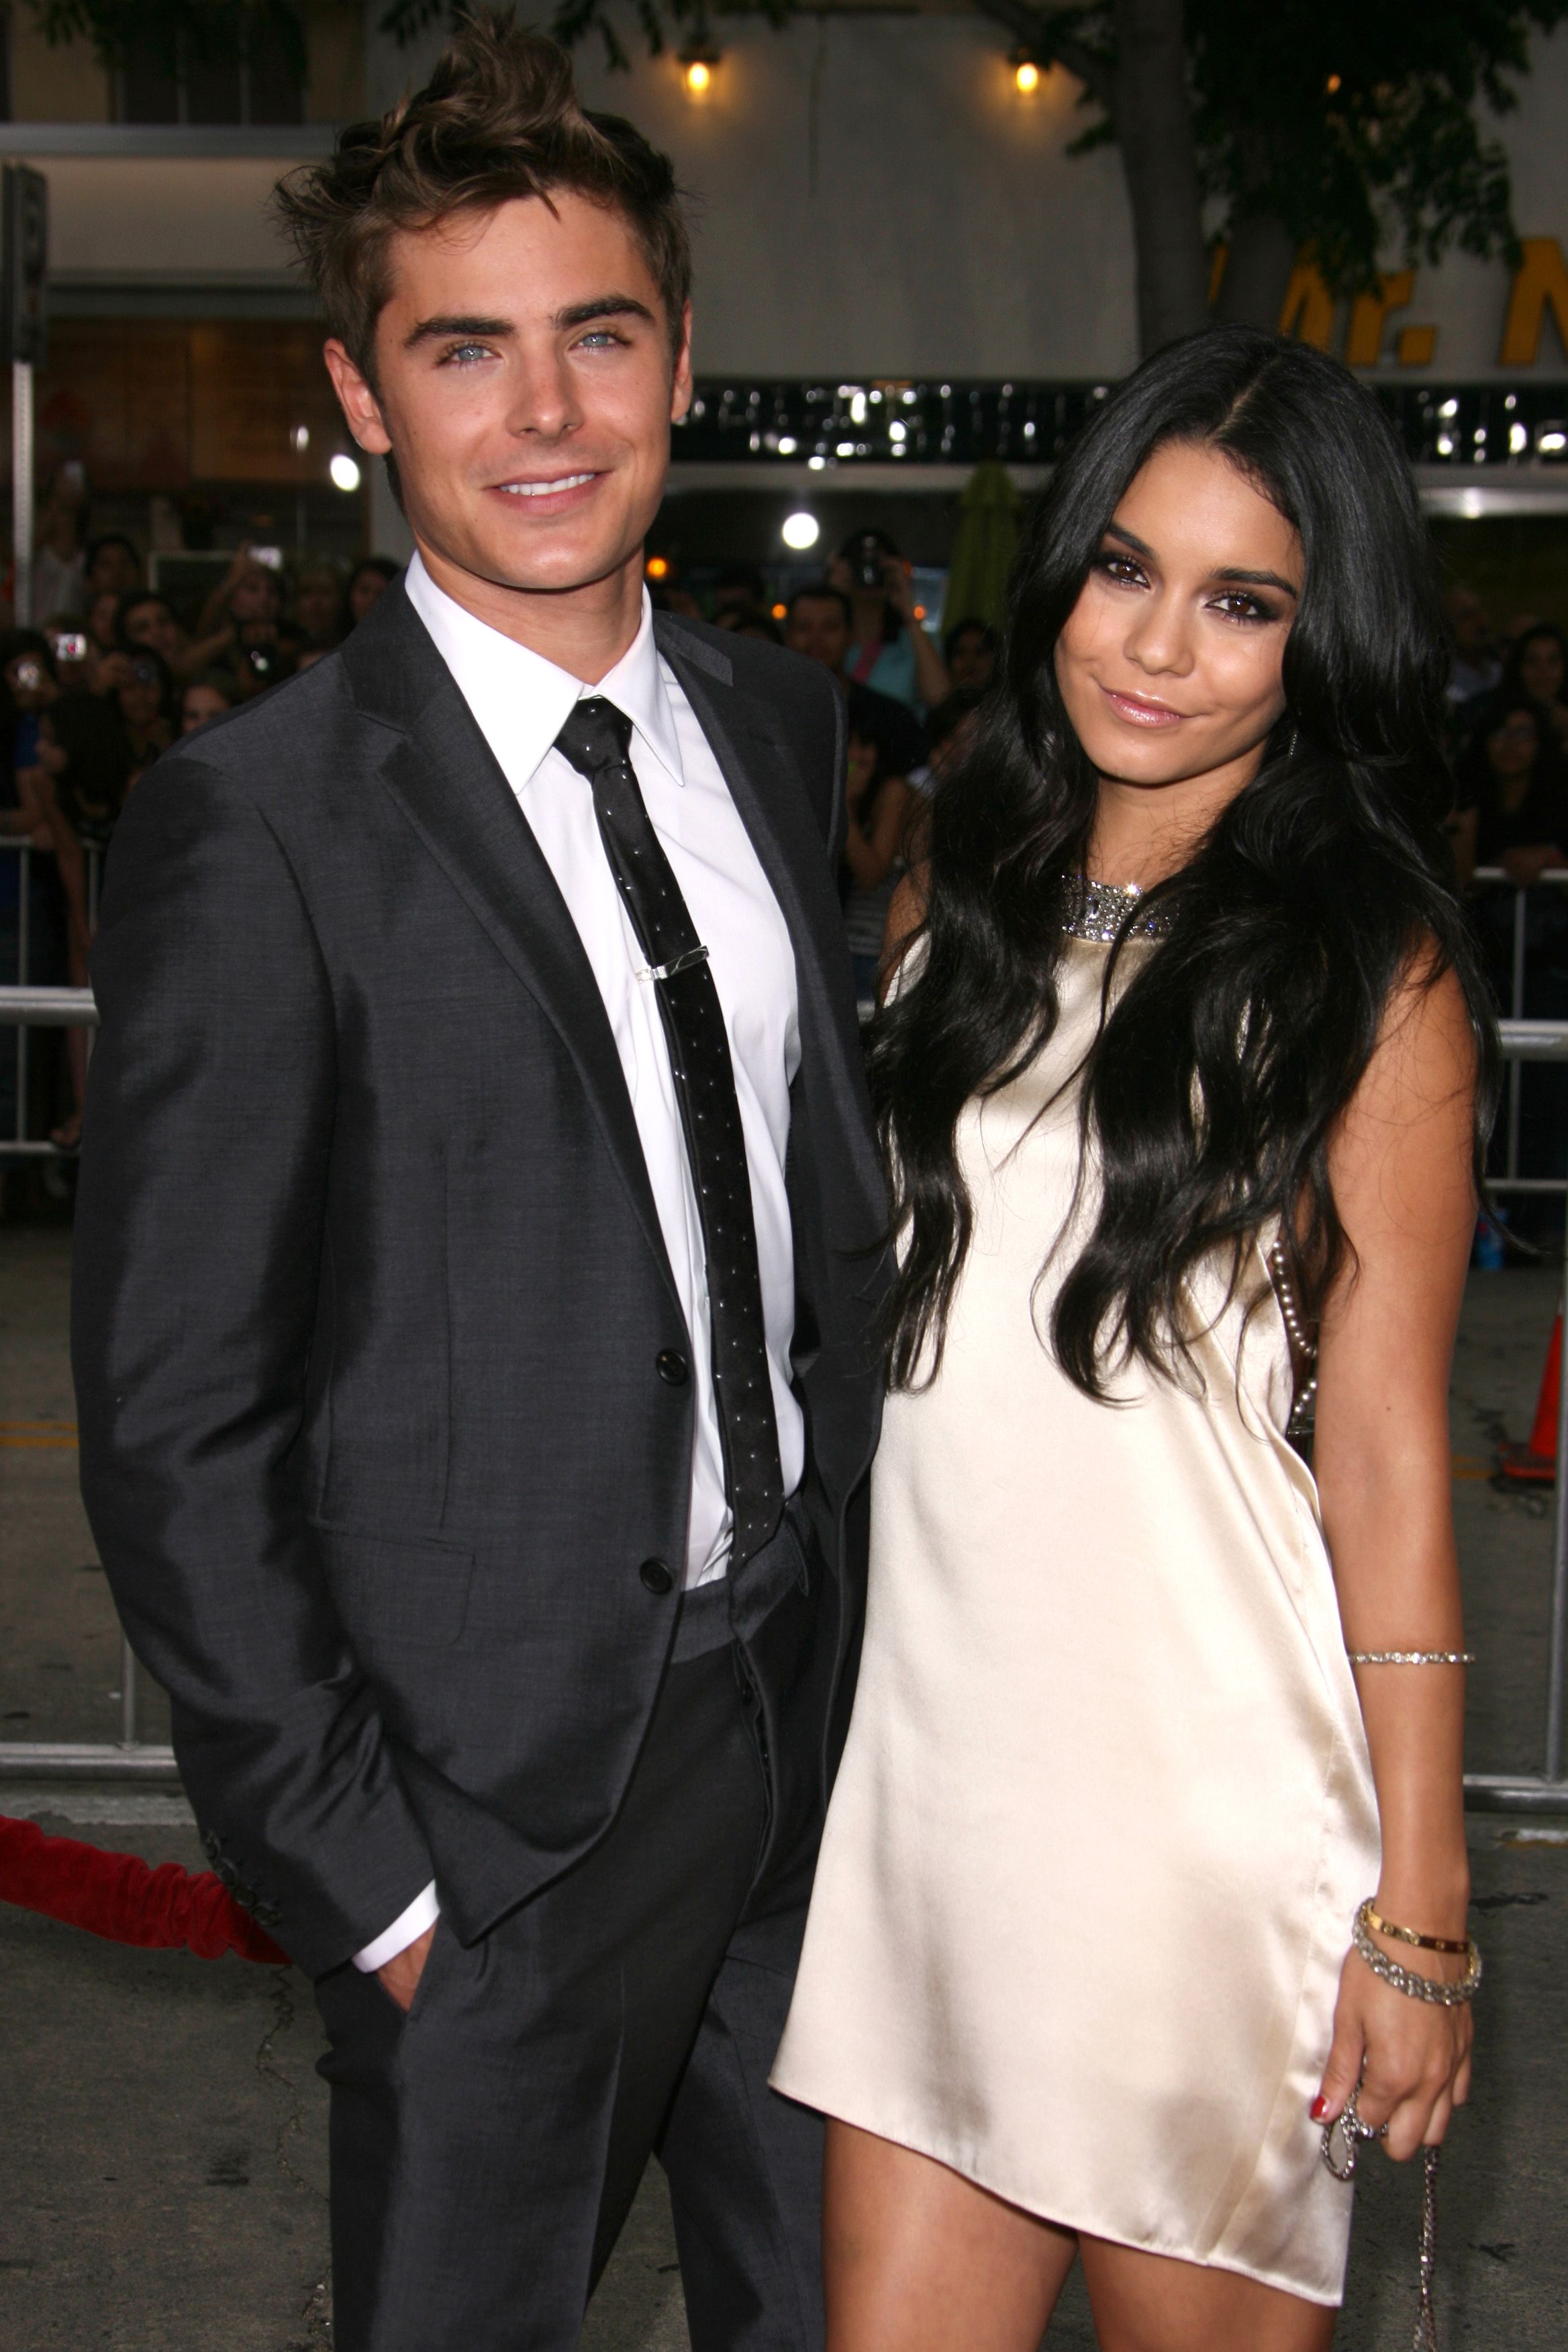 Zac Efron's Girlfriend Guide to His Love Life and Relationships